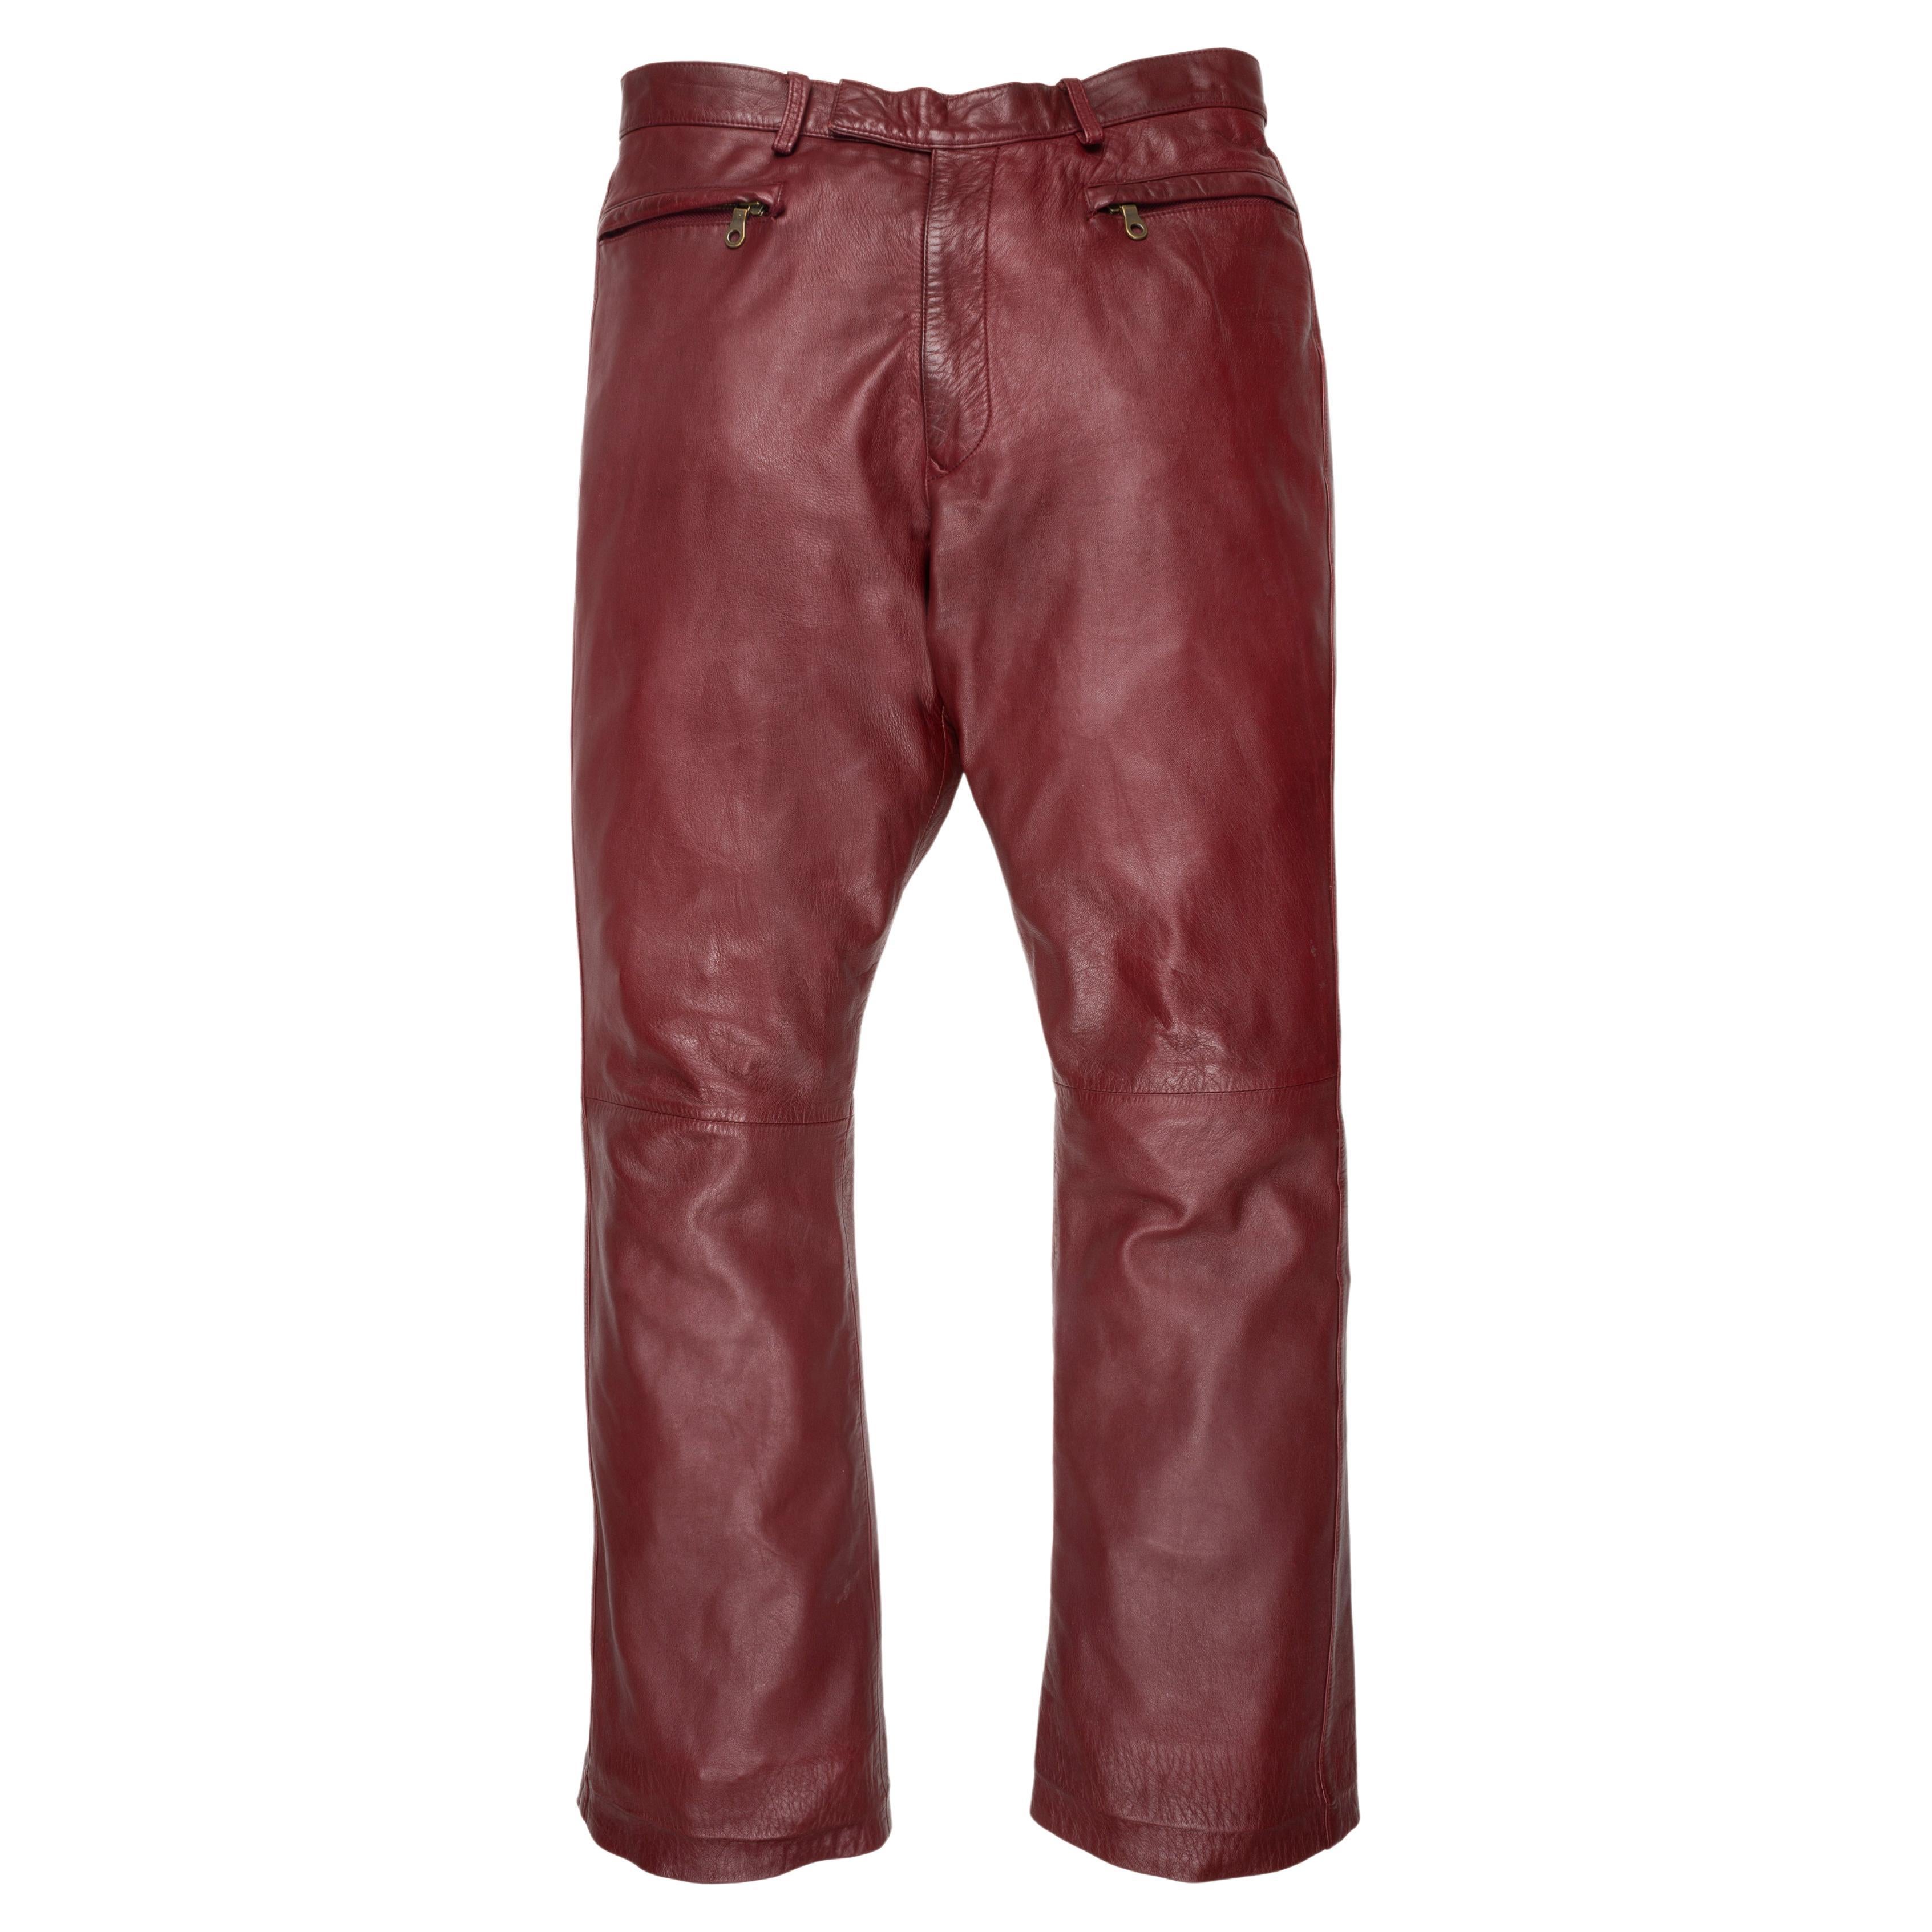 Jean Paul Gaultier Homme Red Leather Pants